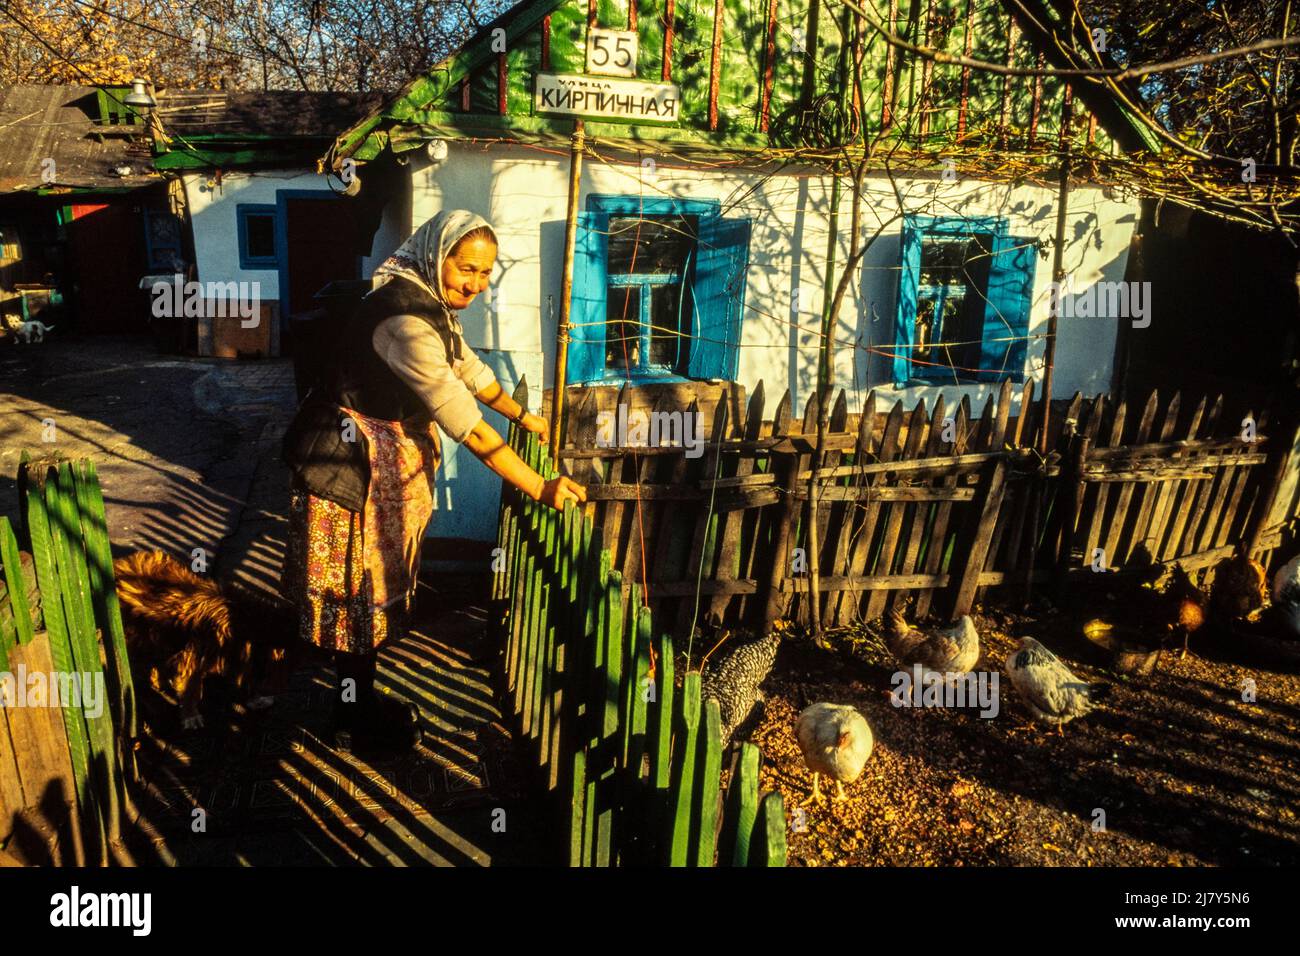 A woman looks over her chickens in an enclosure beside her house, Donetsk, Ukraine, November 1989 Stock Photo